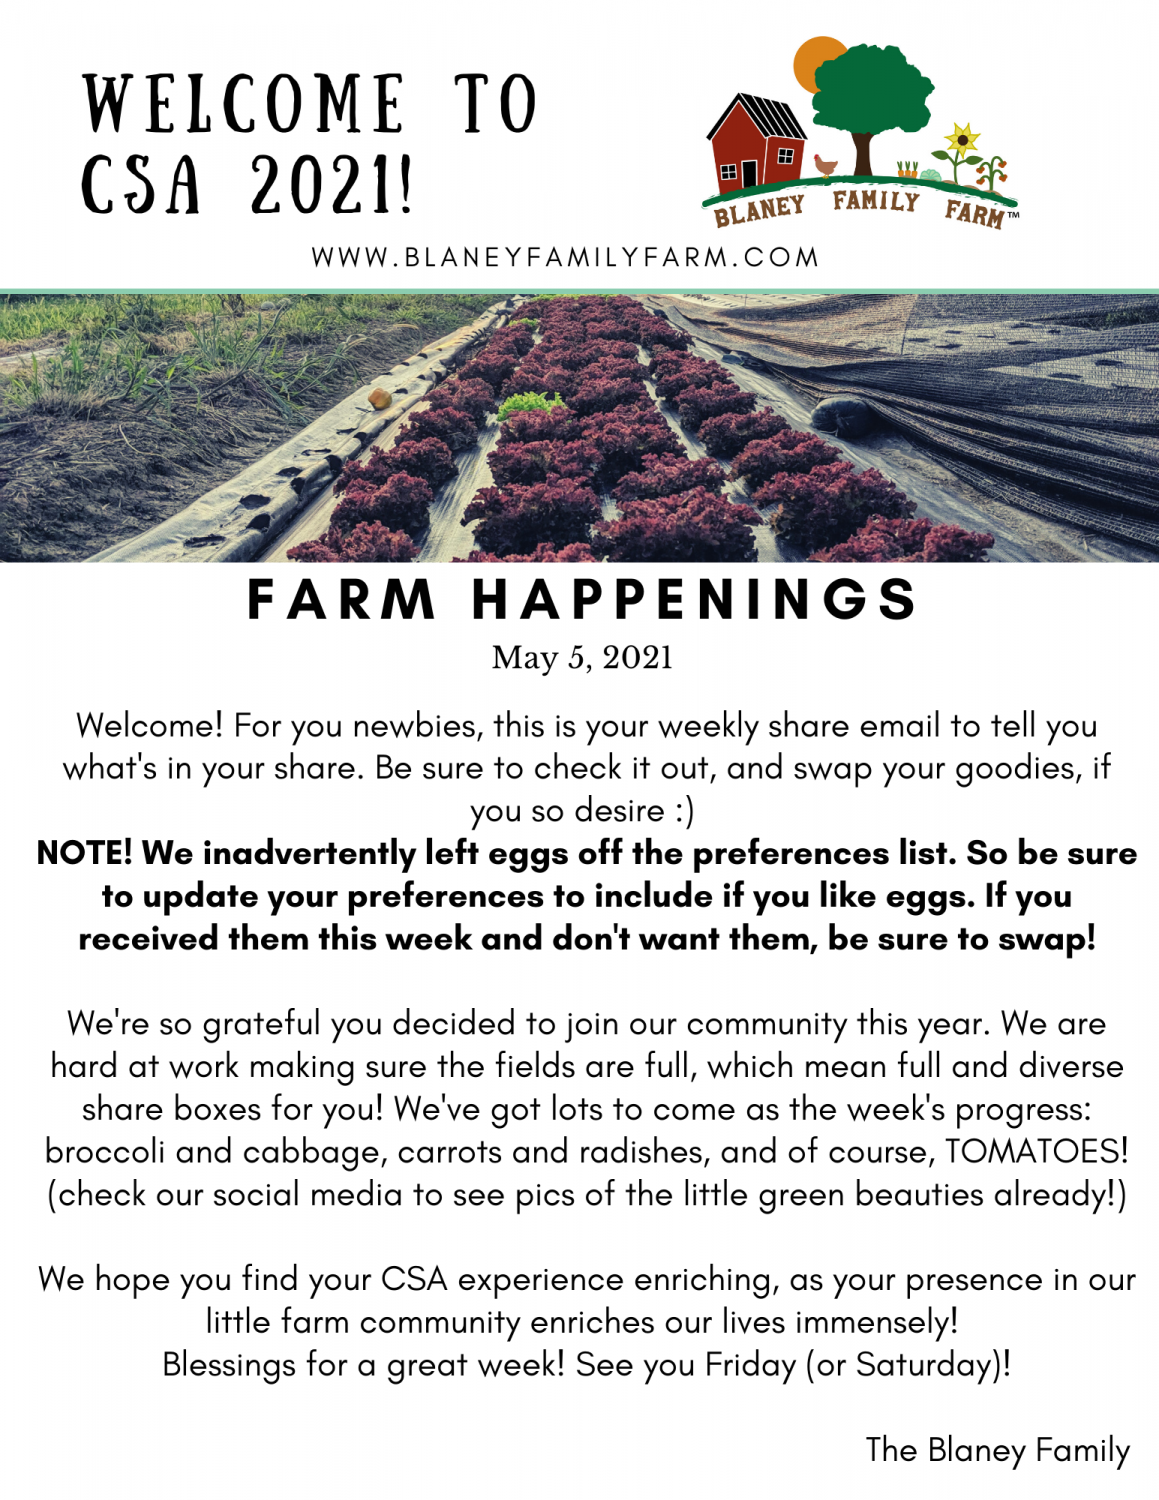 Welcome to CSA and Farm Happenings!